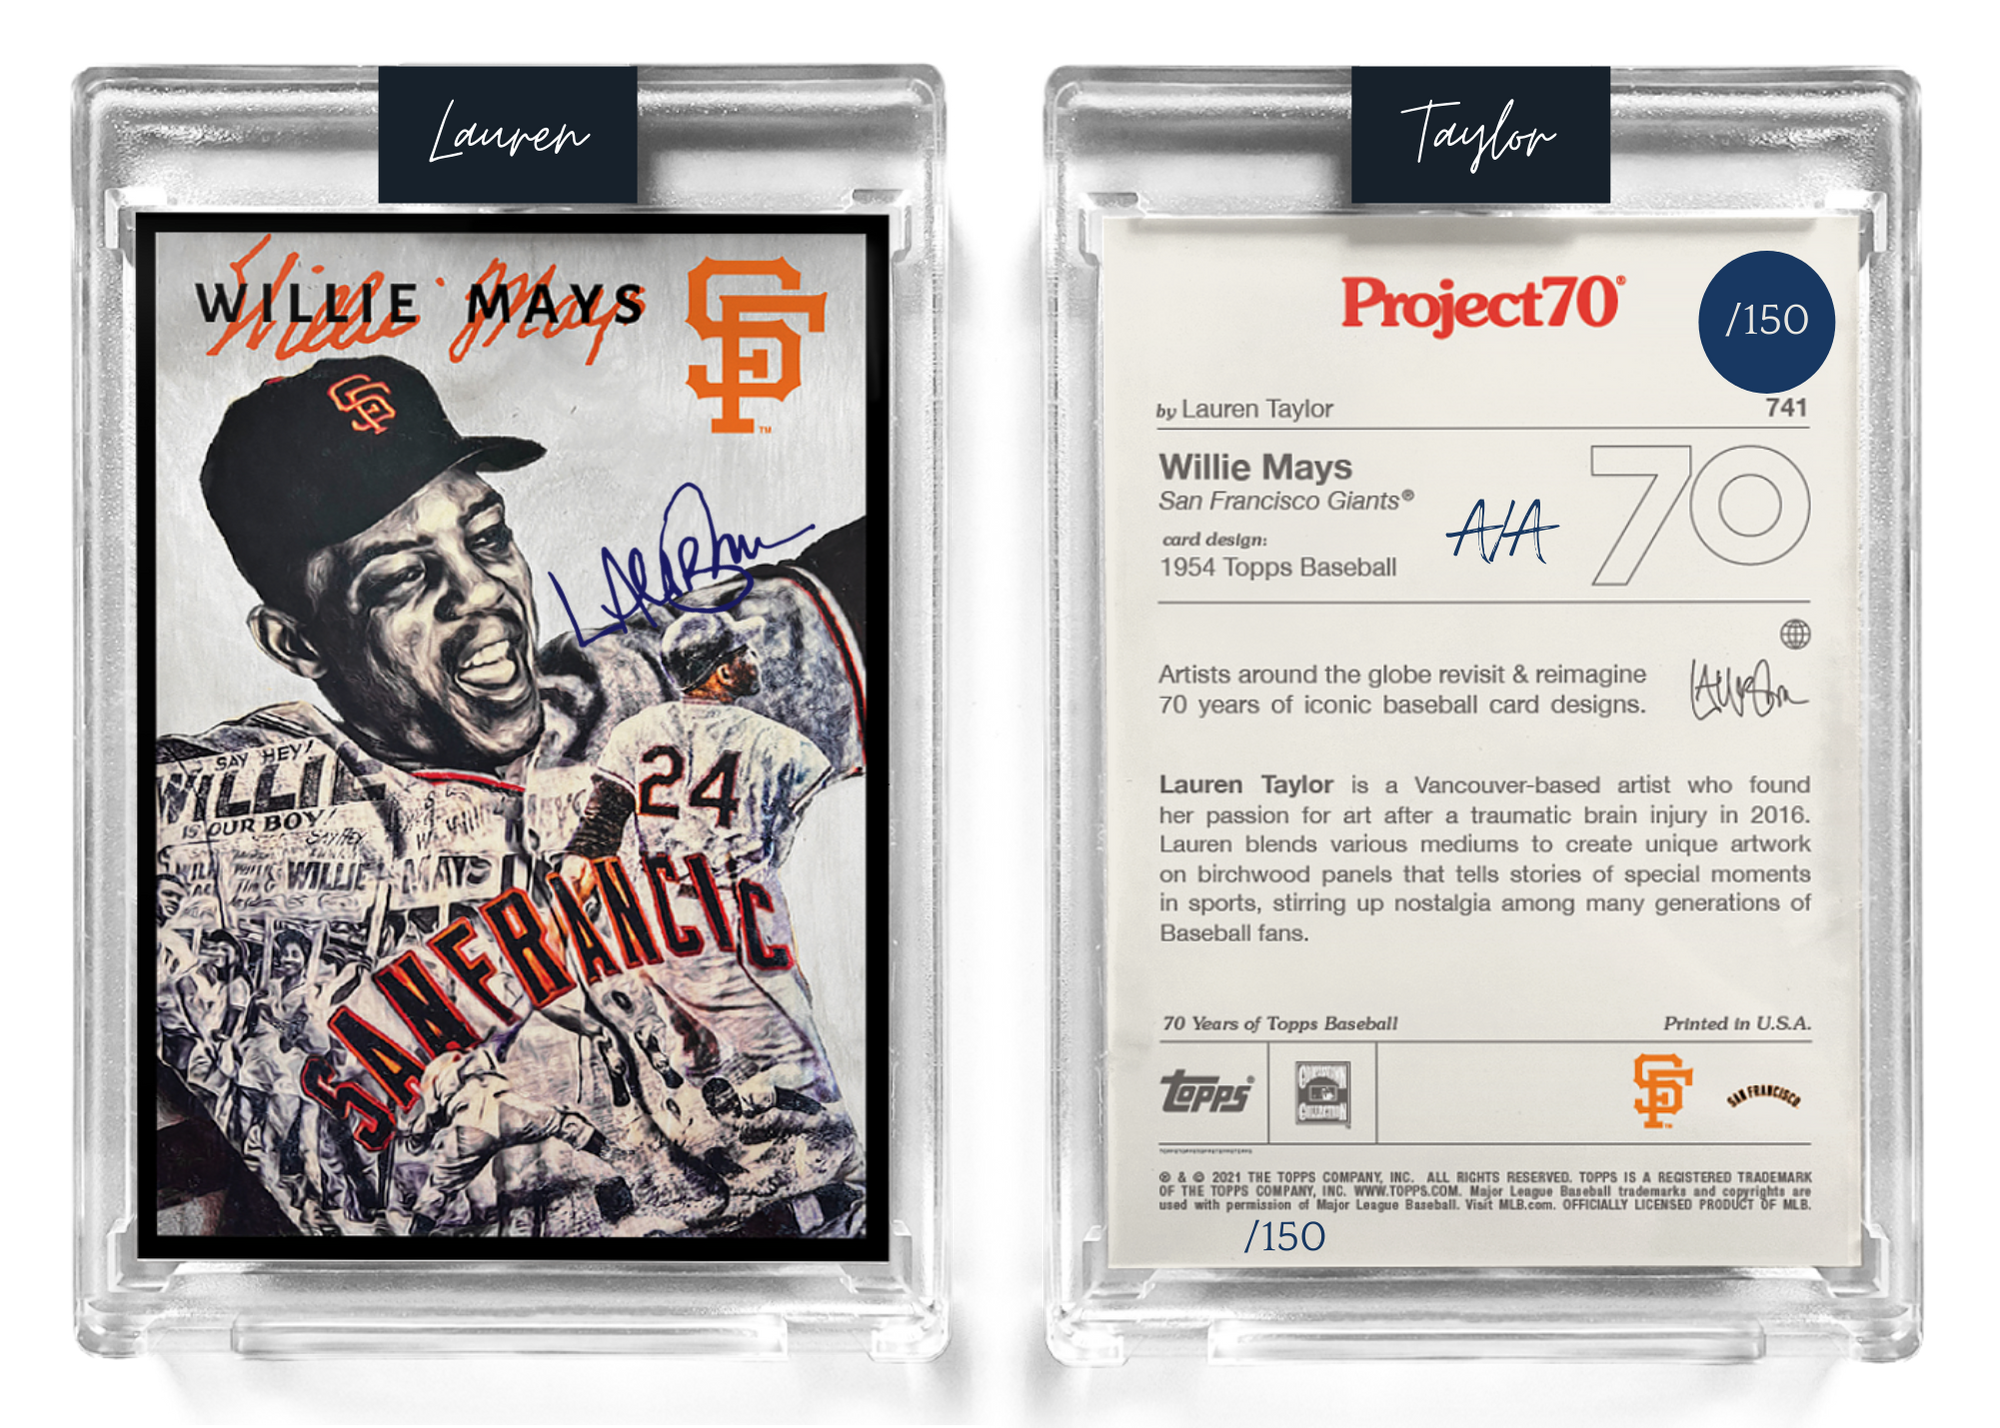 /150 Navy Blue Artist Signature - Topps Project 70 130pt card #741 by Lauren Taylor - Willie Mays